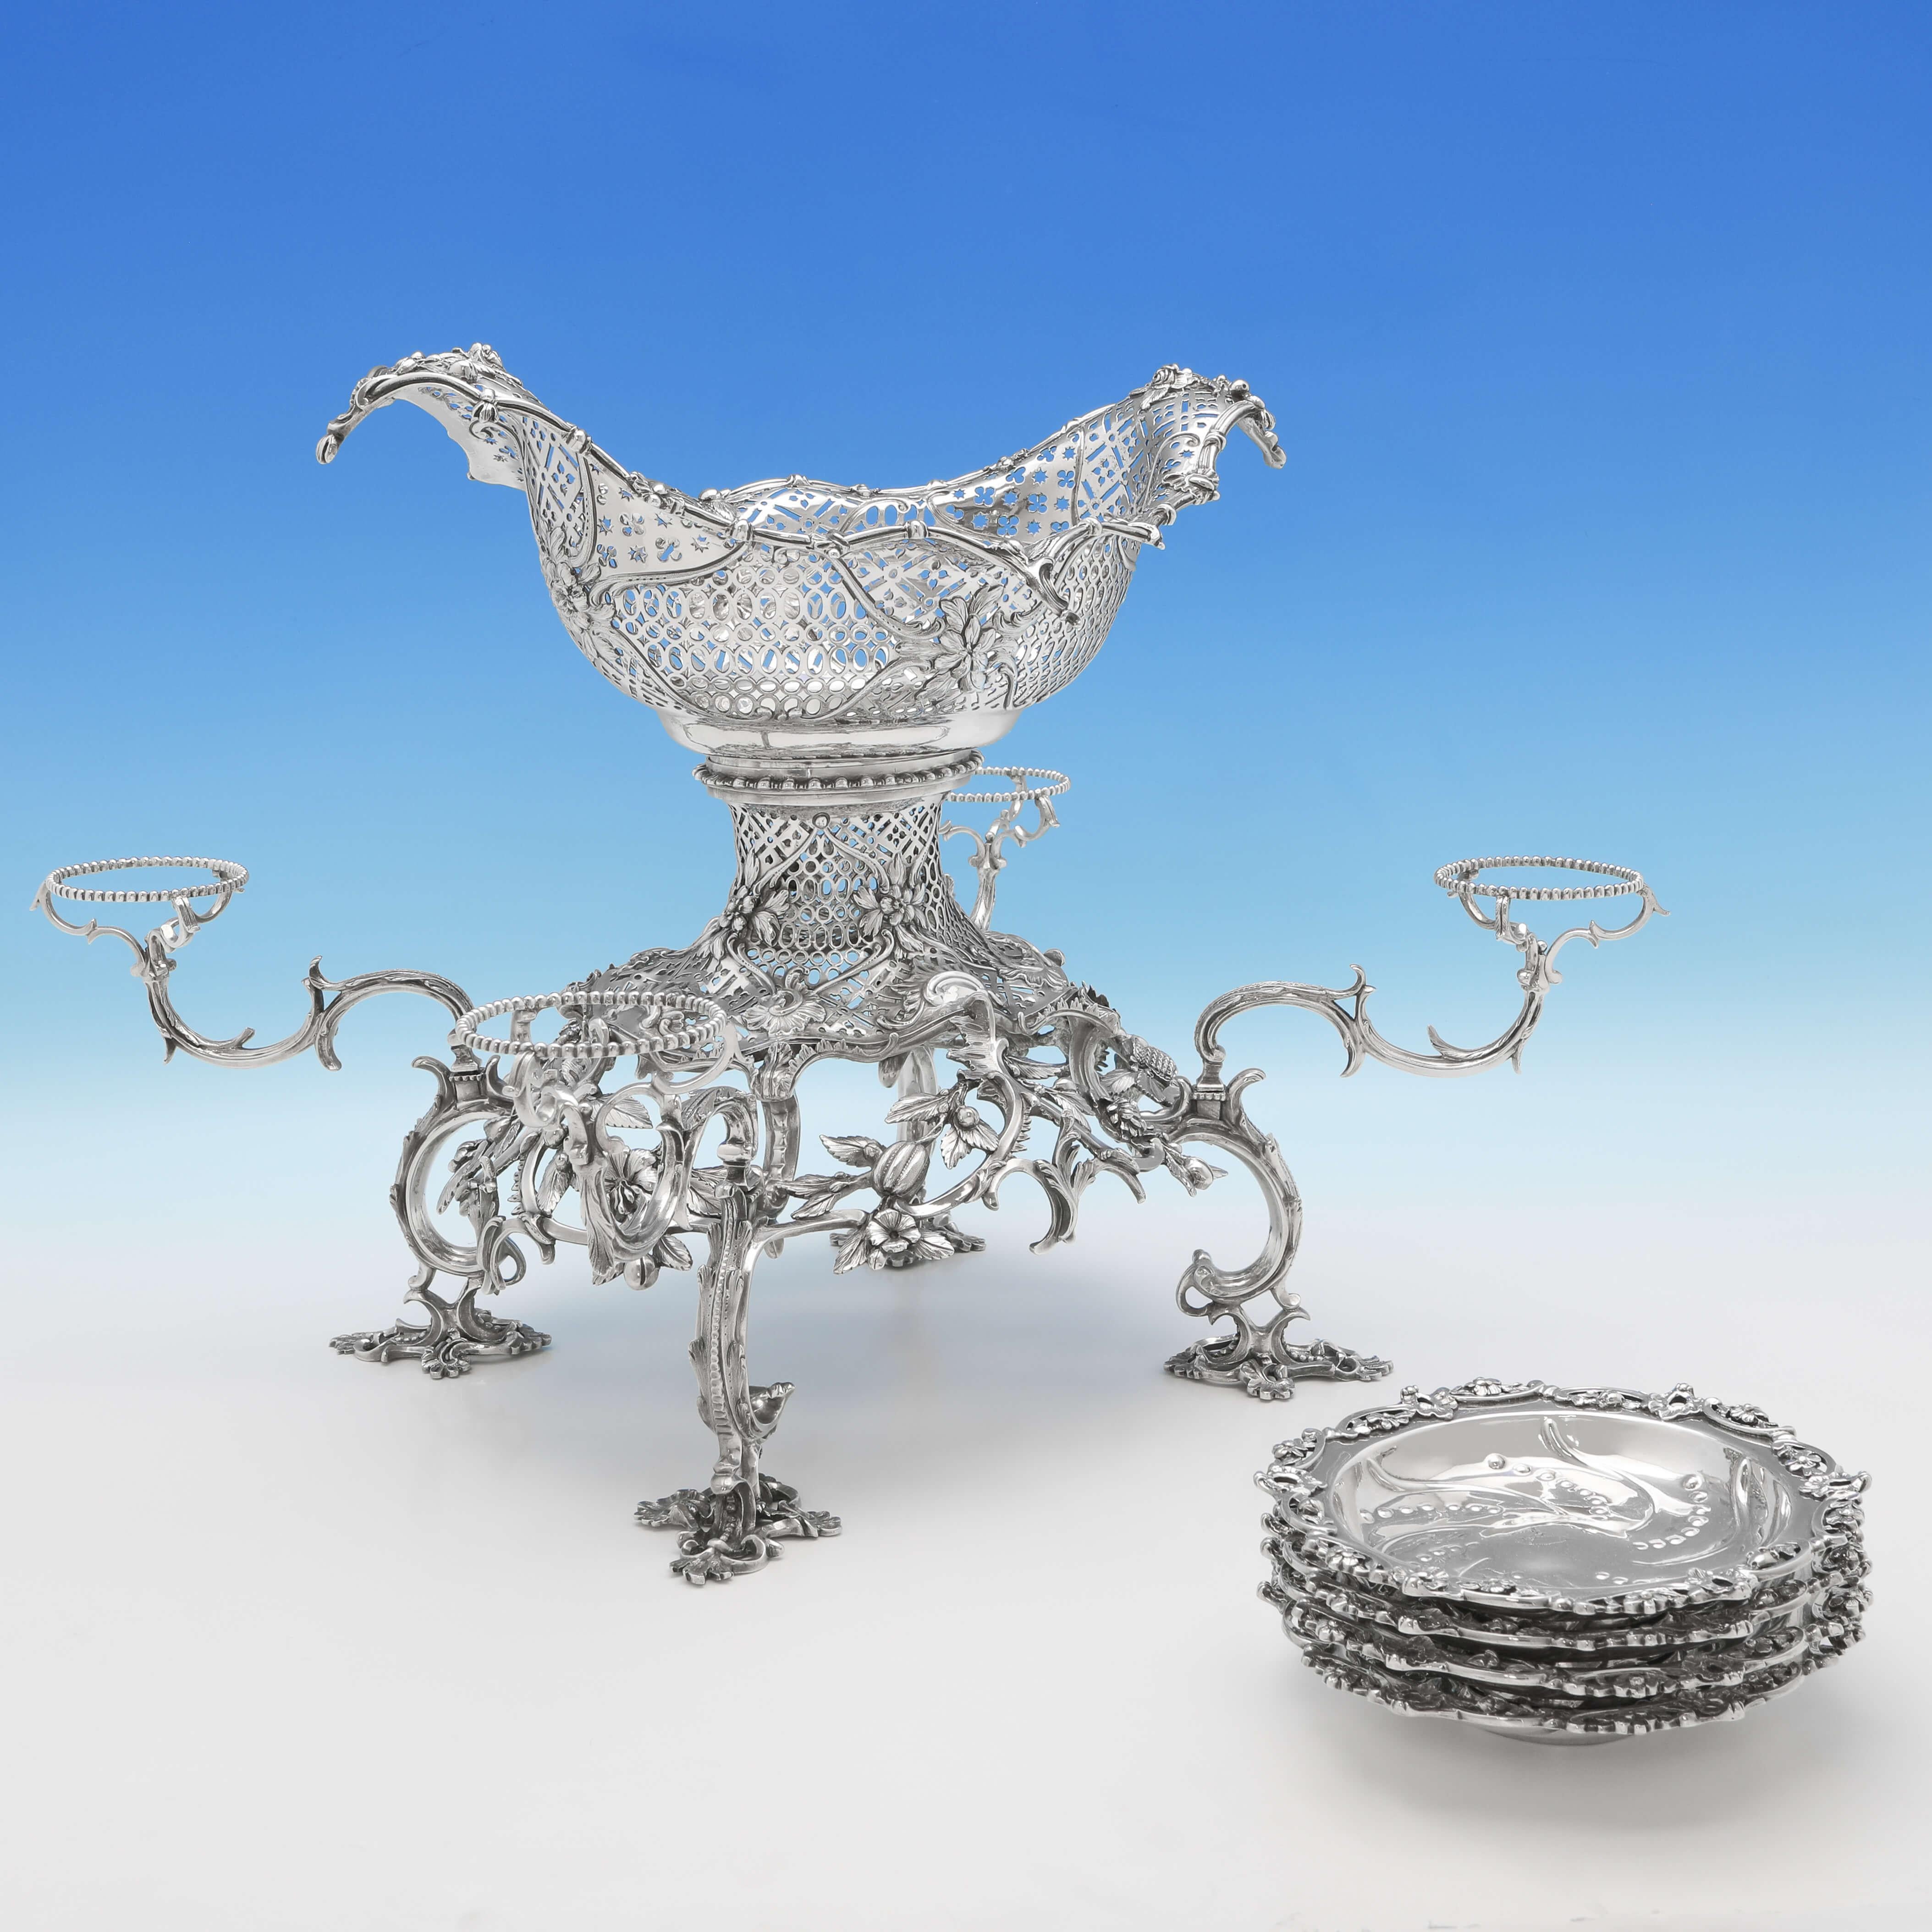 Hallmarked in London, in 1762 by Thomas Pitts, this attractive, George III, antique sterling silver epergne, has four side dishes and a central larger bowl, and is in the rococo style. The epergne measures 13.5 inches (34cm) tall, by 20 inches